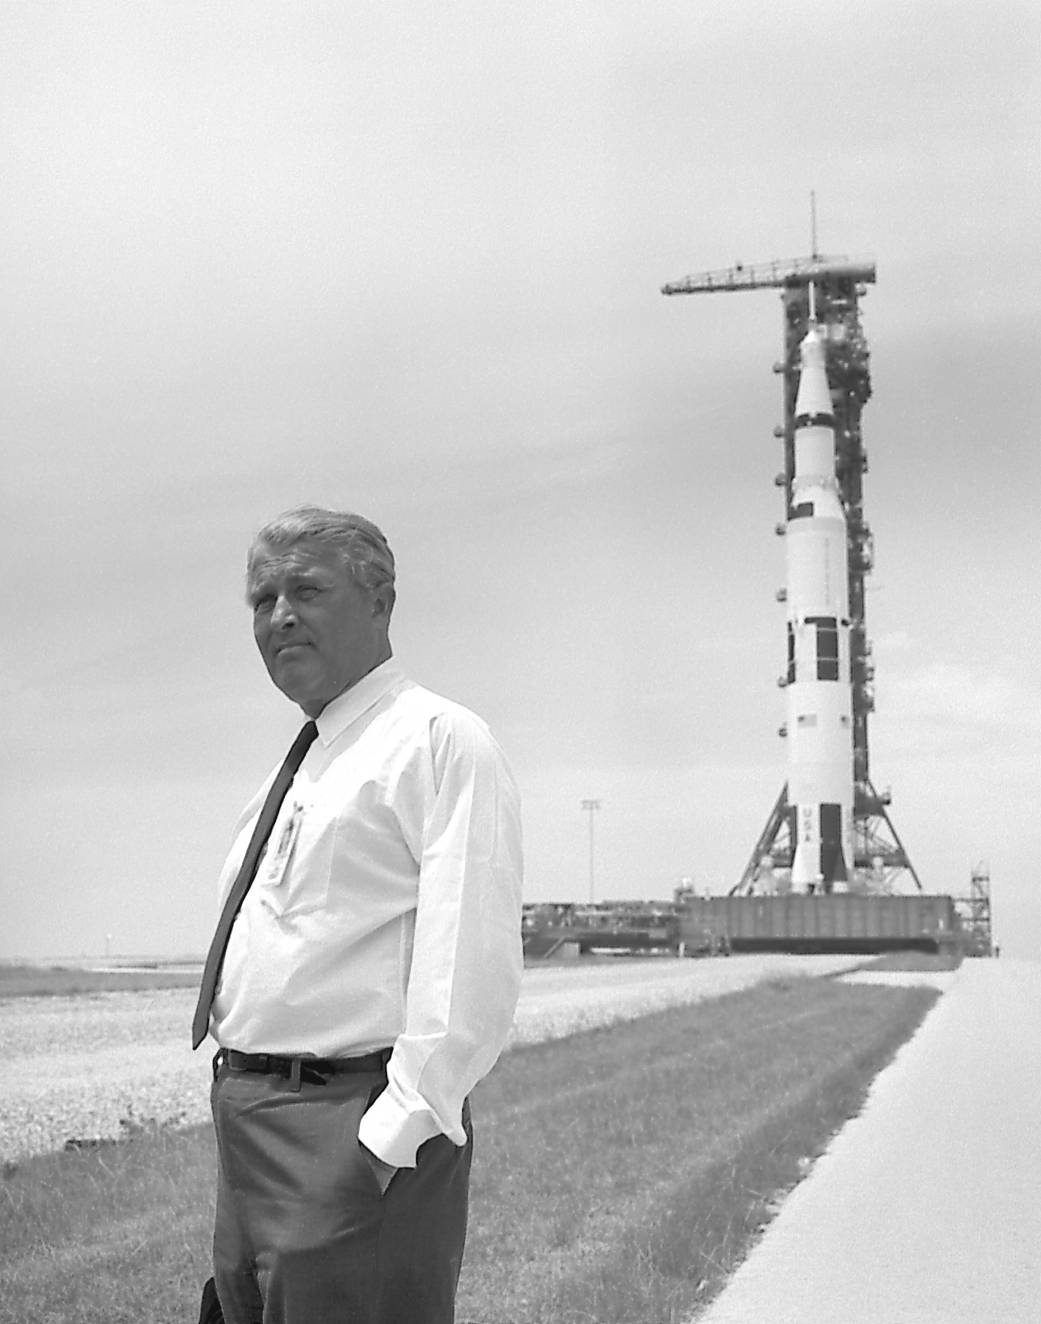 Dr. Wernher von Braun pauses in front of the Saturn V vehicle being readied for the historic Apollo 11 lunar landing mission. 